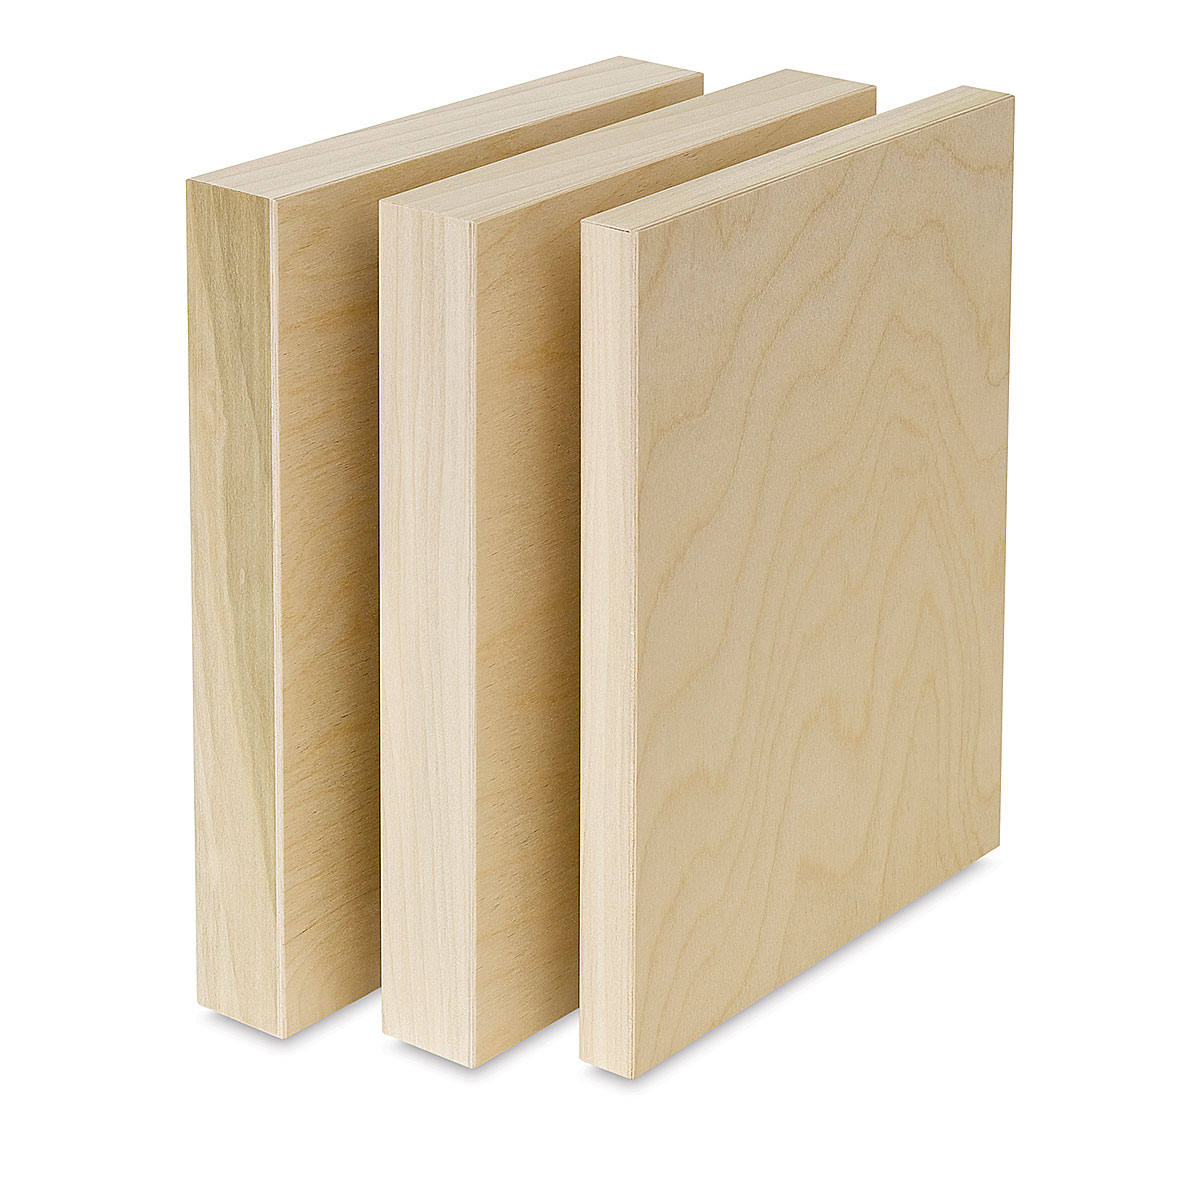 5 Pcs Wood Canvas Boards,6 x 6 Unfinished Wood Painting Board 0.4 Deep Wooden Cradled Painting Panel for Arts & Craft 